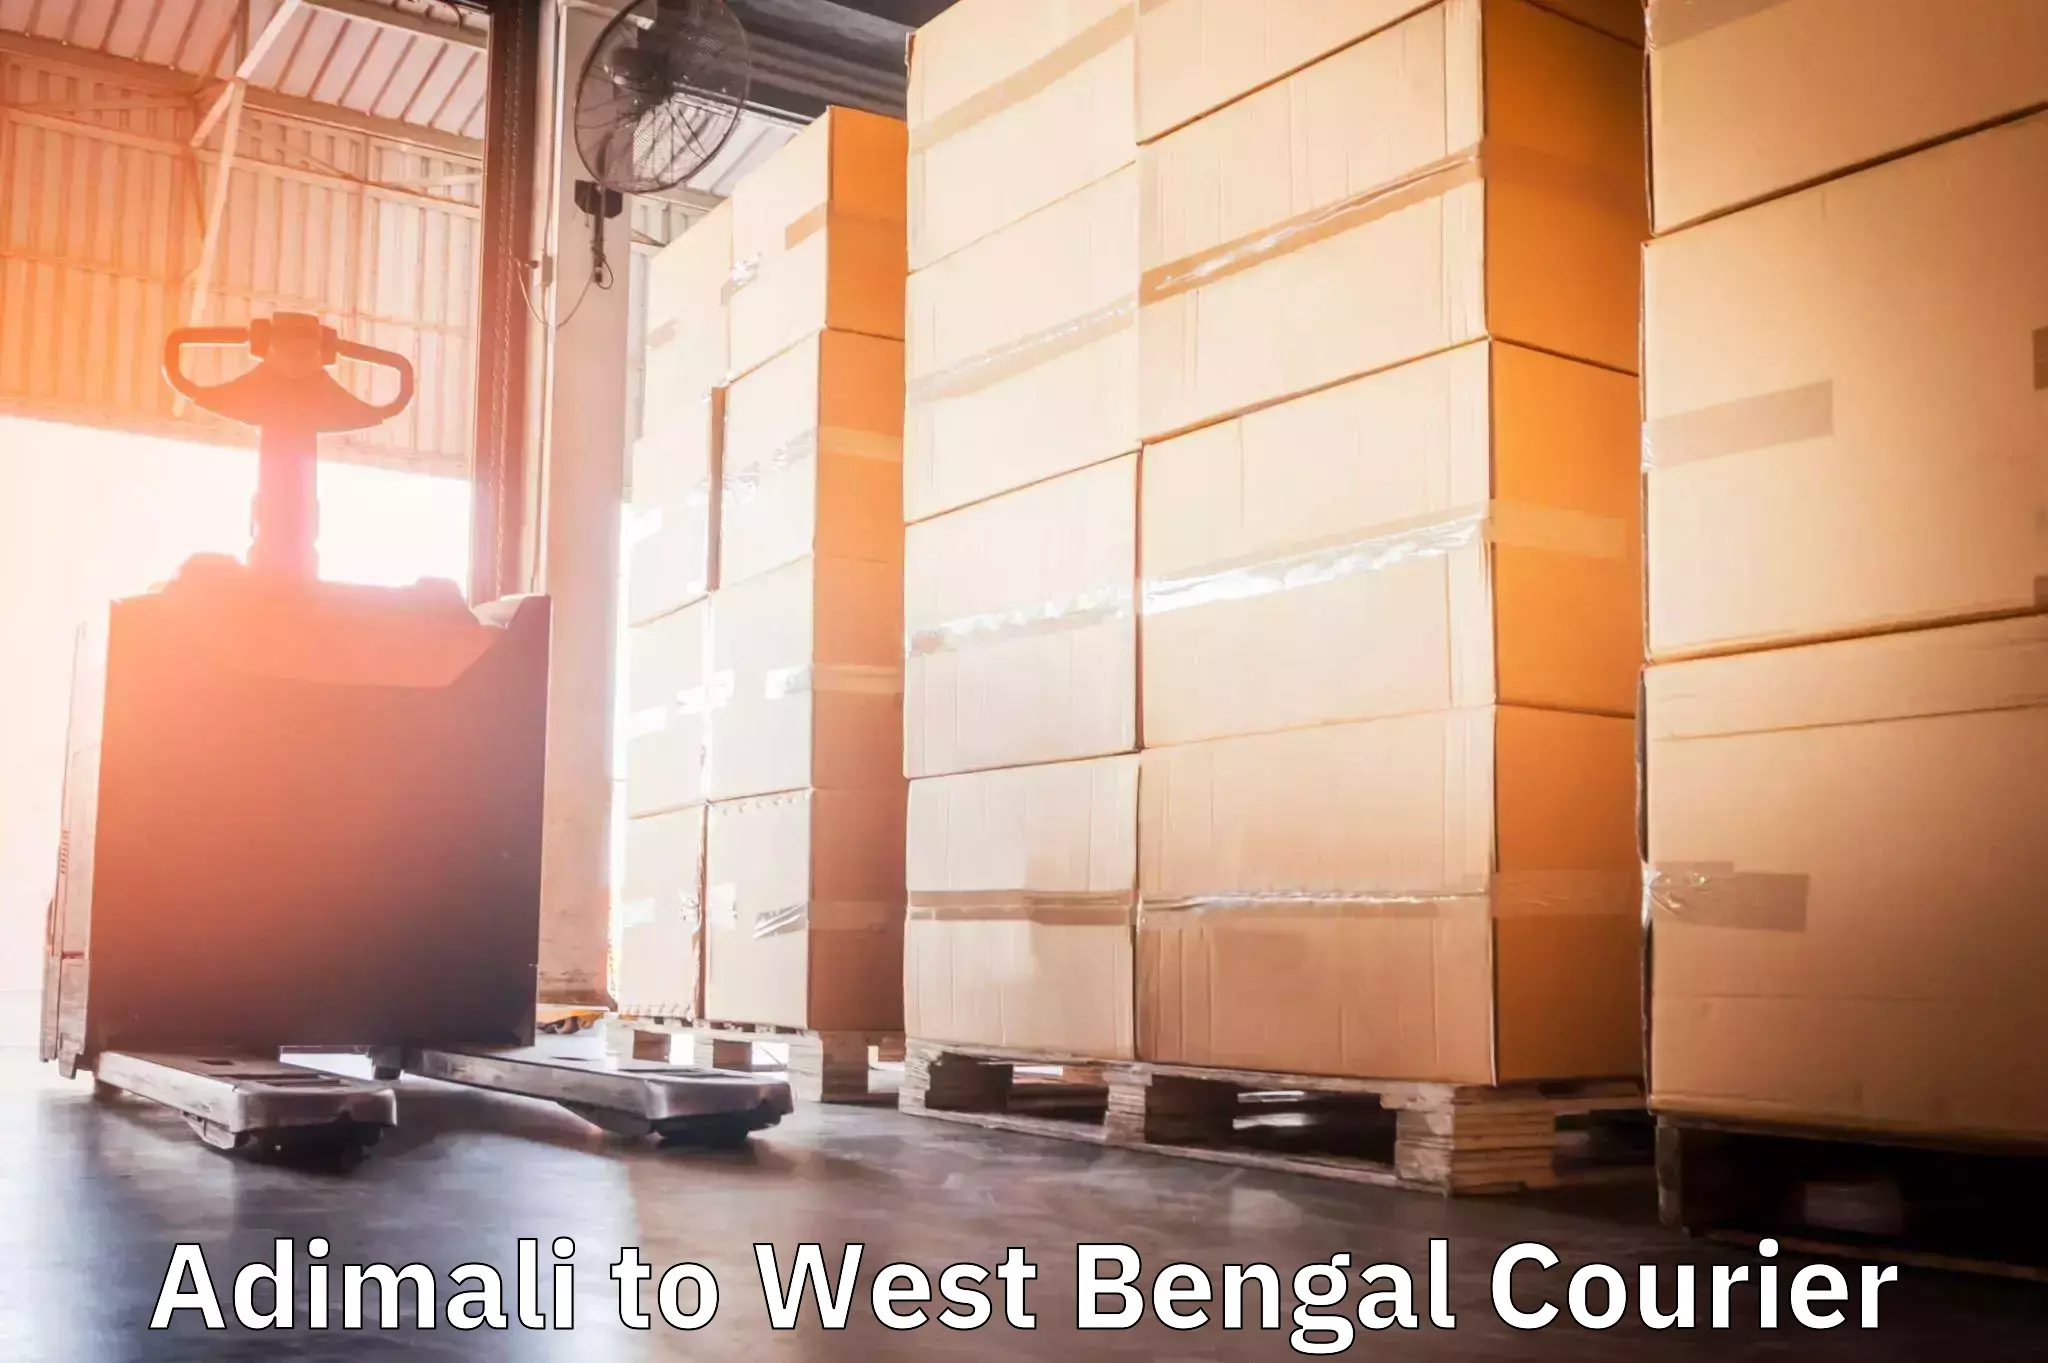 Express delivery network in Adimali to West Bengal